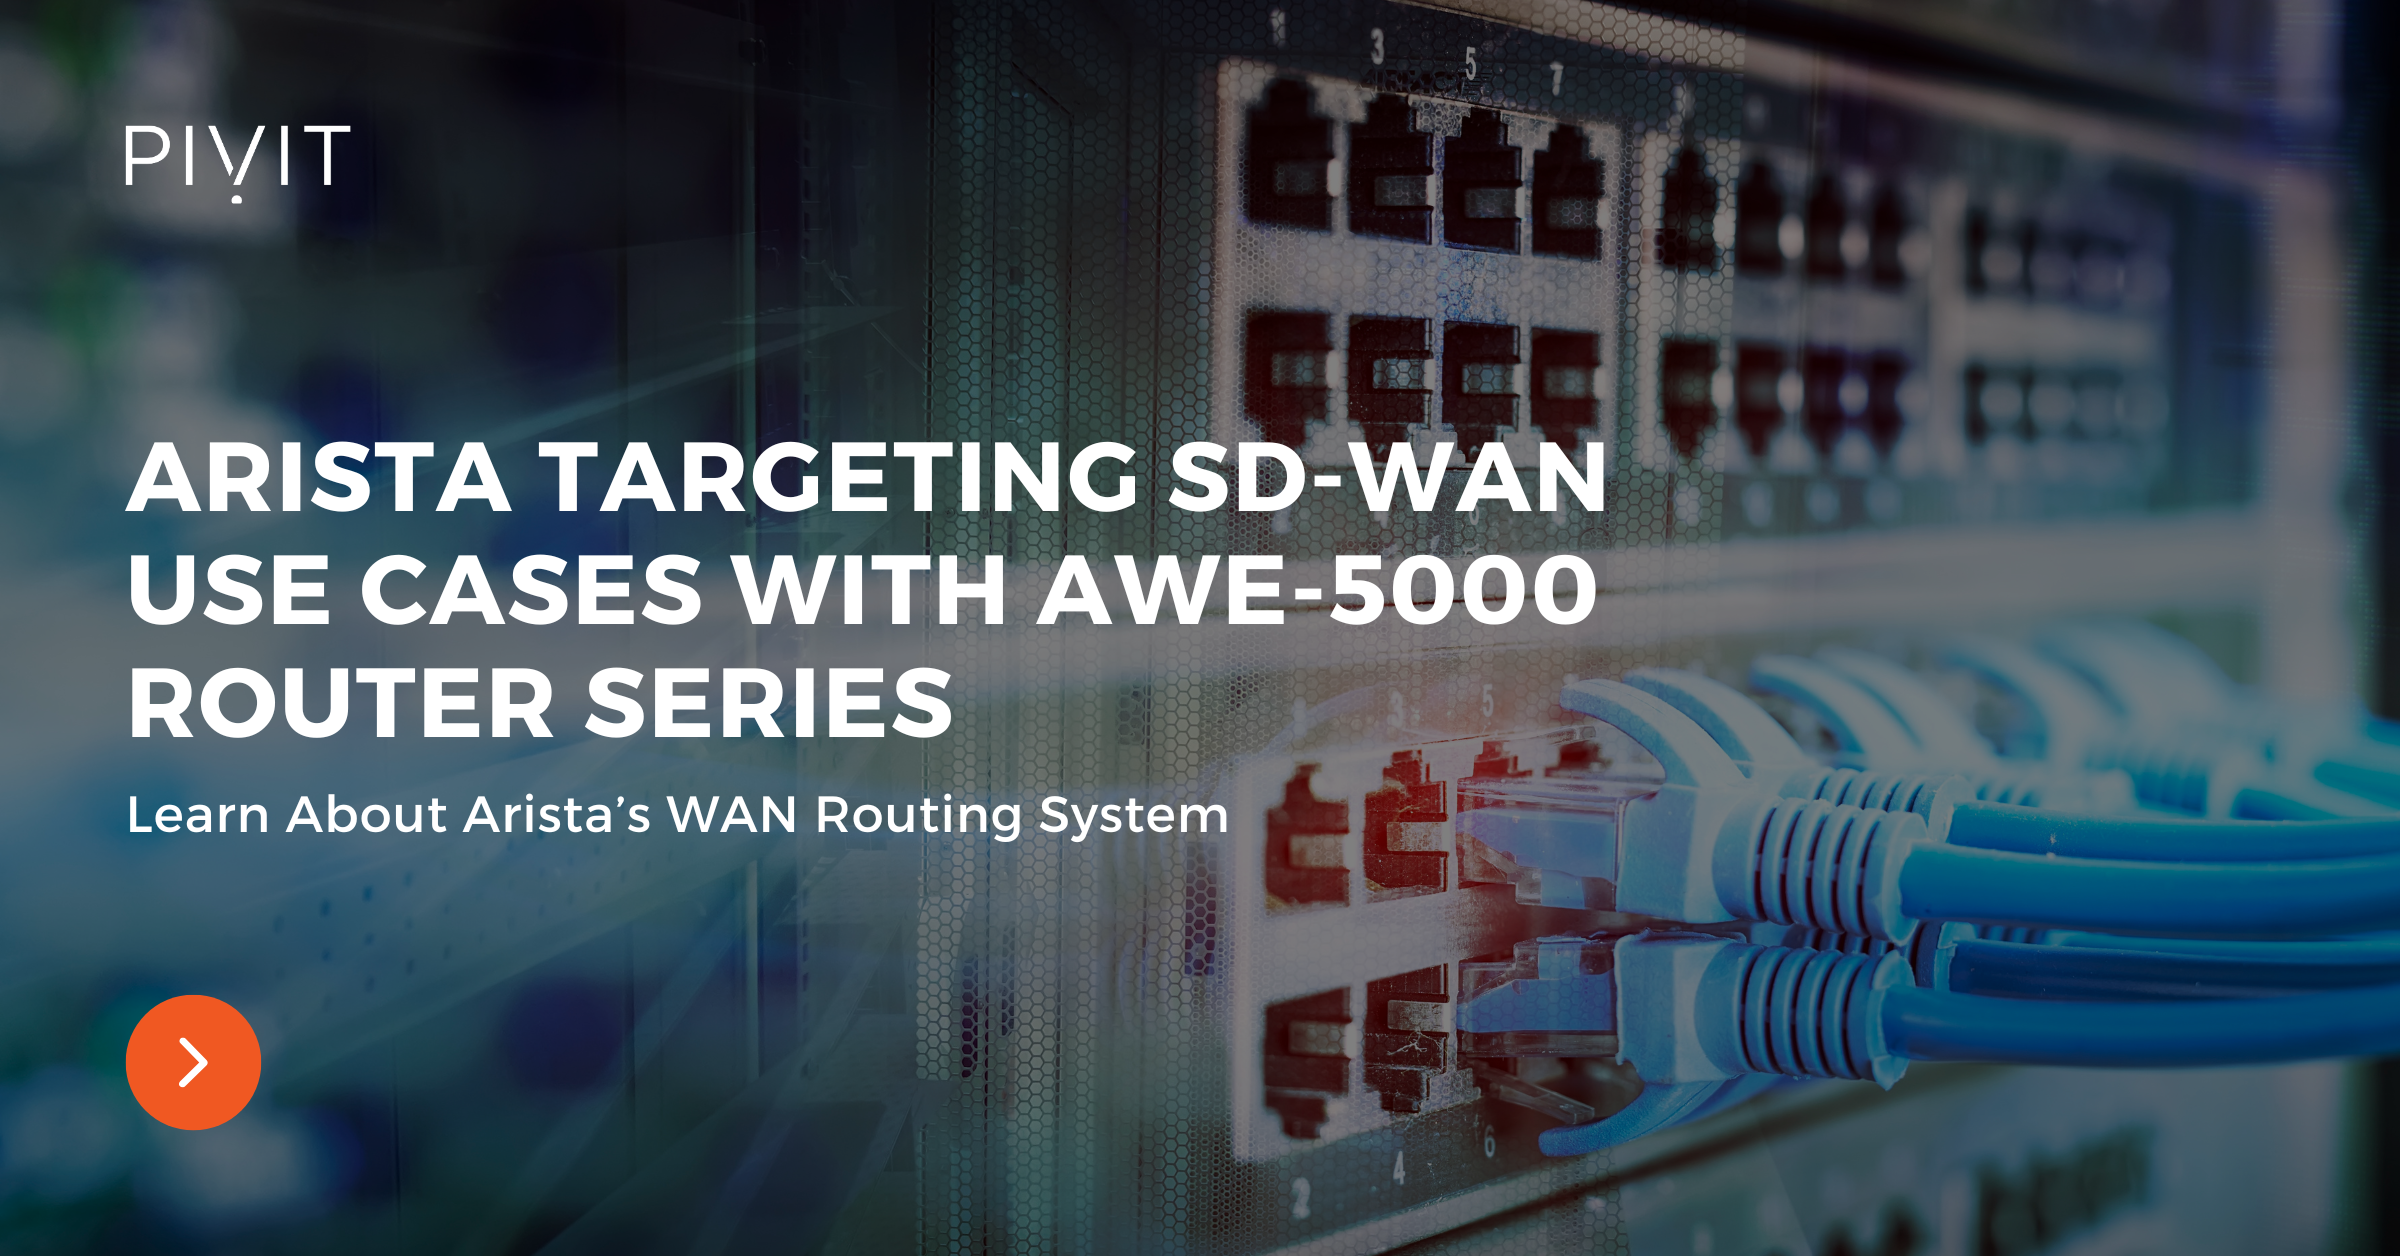 Arista Targeting SD-WAN Use Cases With AWE-5000 Router Series